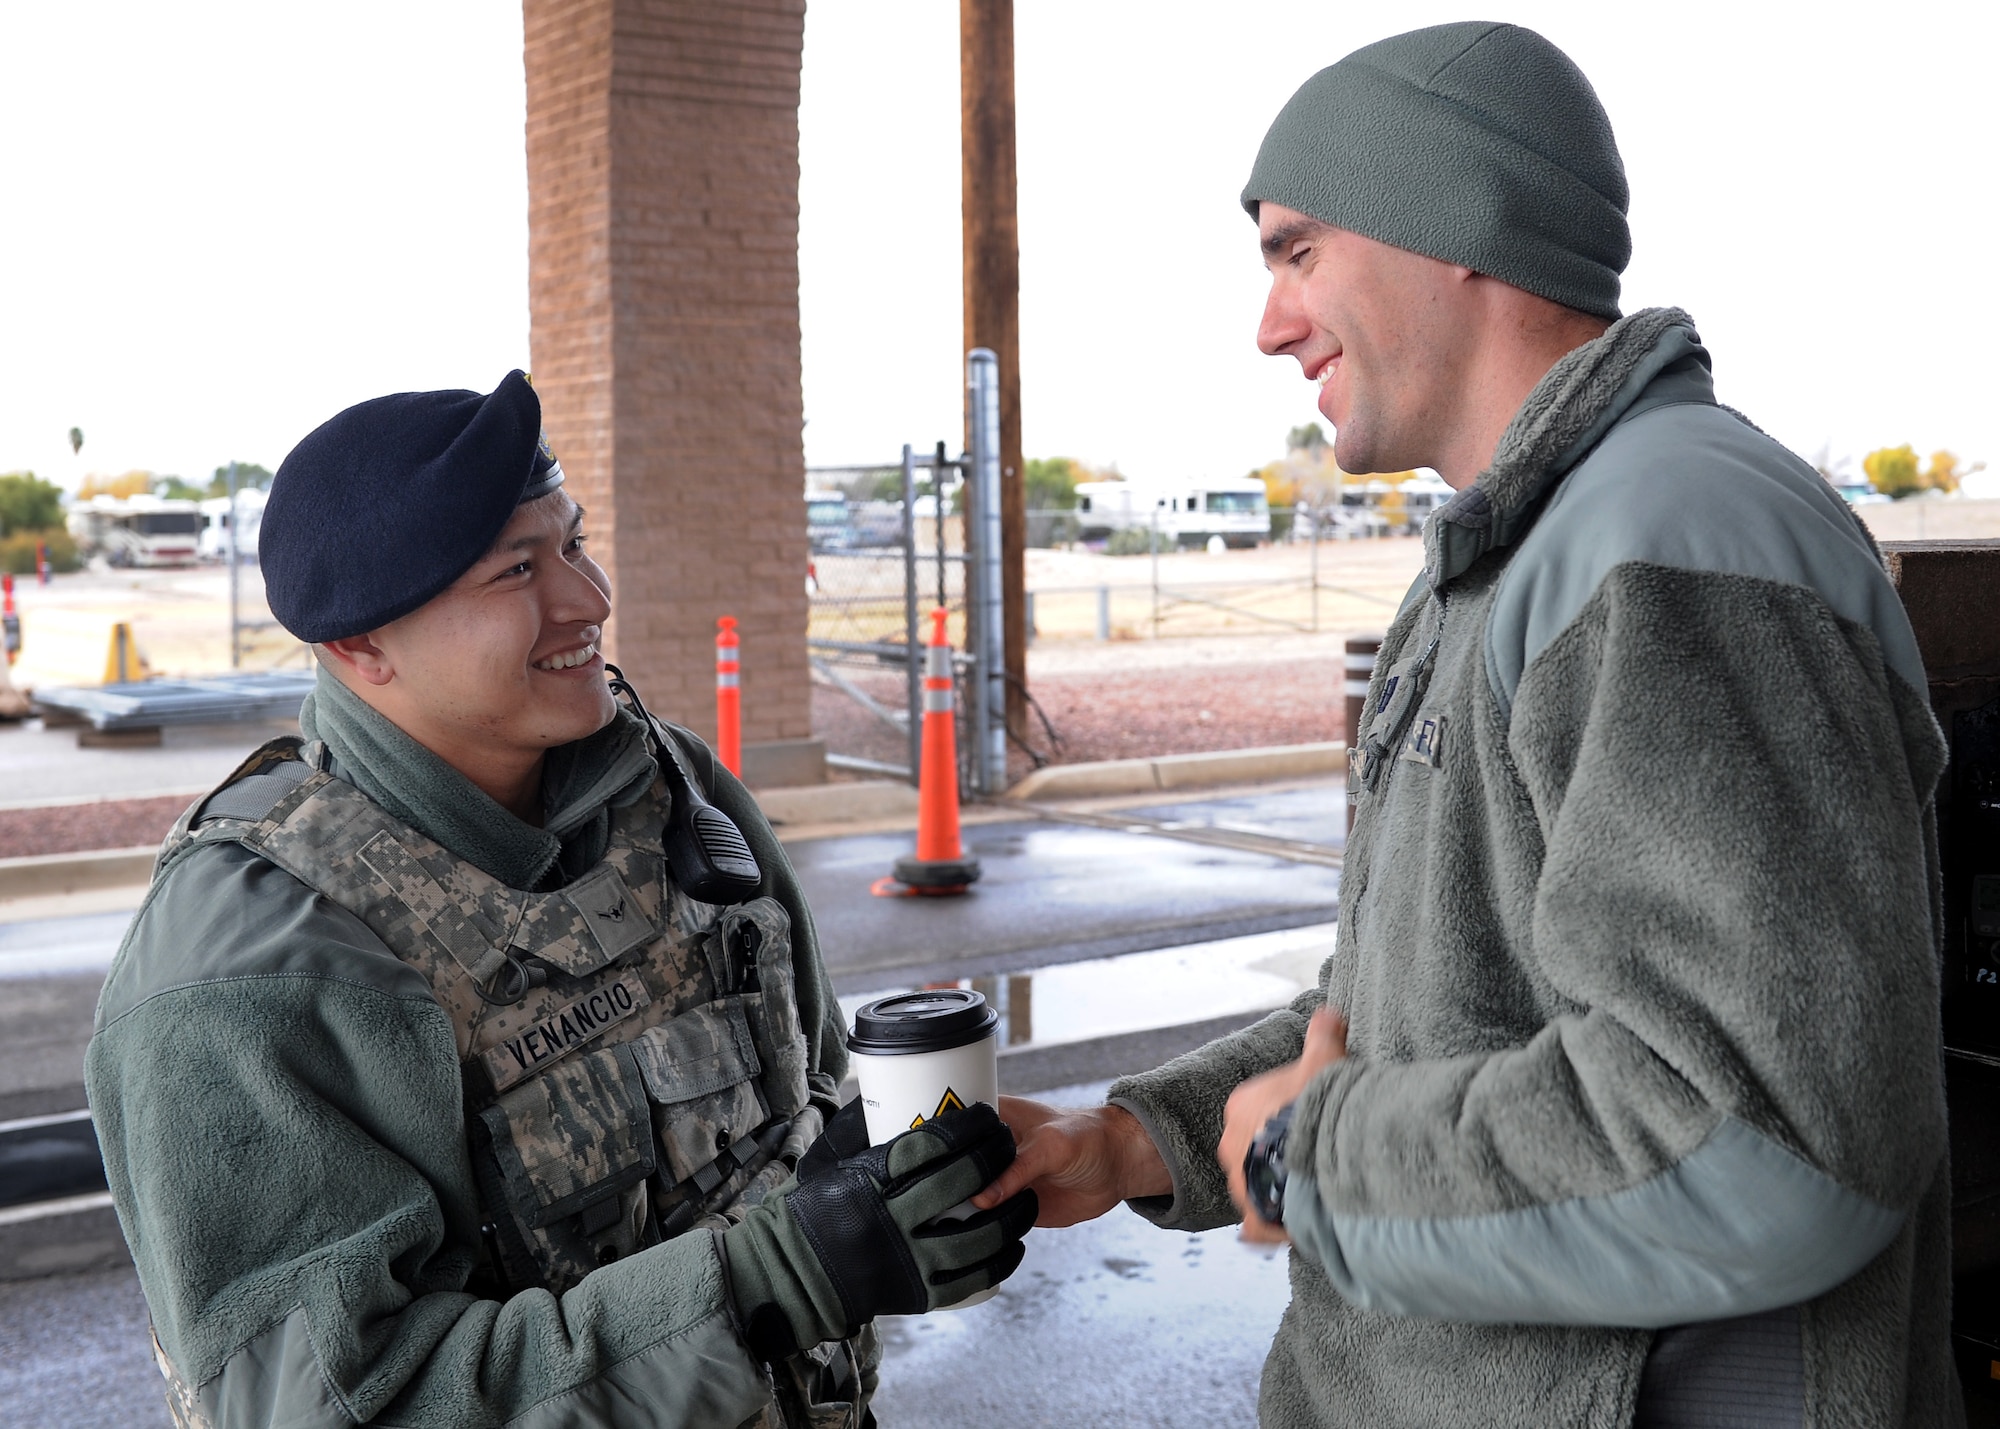 U.S. Air Force Chaplain (Capt.) Justin Szeker, 355th Fighter Wing chaplain, hands Airman Ricardo Venancio, 355th Security Forces Squadron, a cup of hot chocolate at Davis-Monthan Air Force Base, Ariz., Dec. 14, 2015. Szeker and Staff Sgt. George Mena, 355th Fighter Wing chaplain’s assistant, went around to the entry control points to give hot chocolate to all the SFS Airmen who were out in the cold. (U.S. Air Force photo by Senior Airman Cheyenne A. Powers/ Released)

